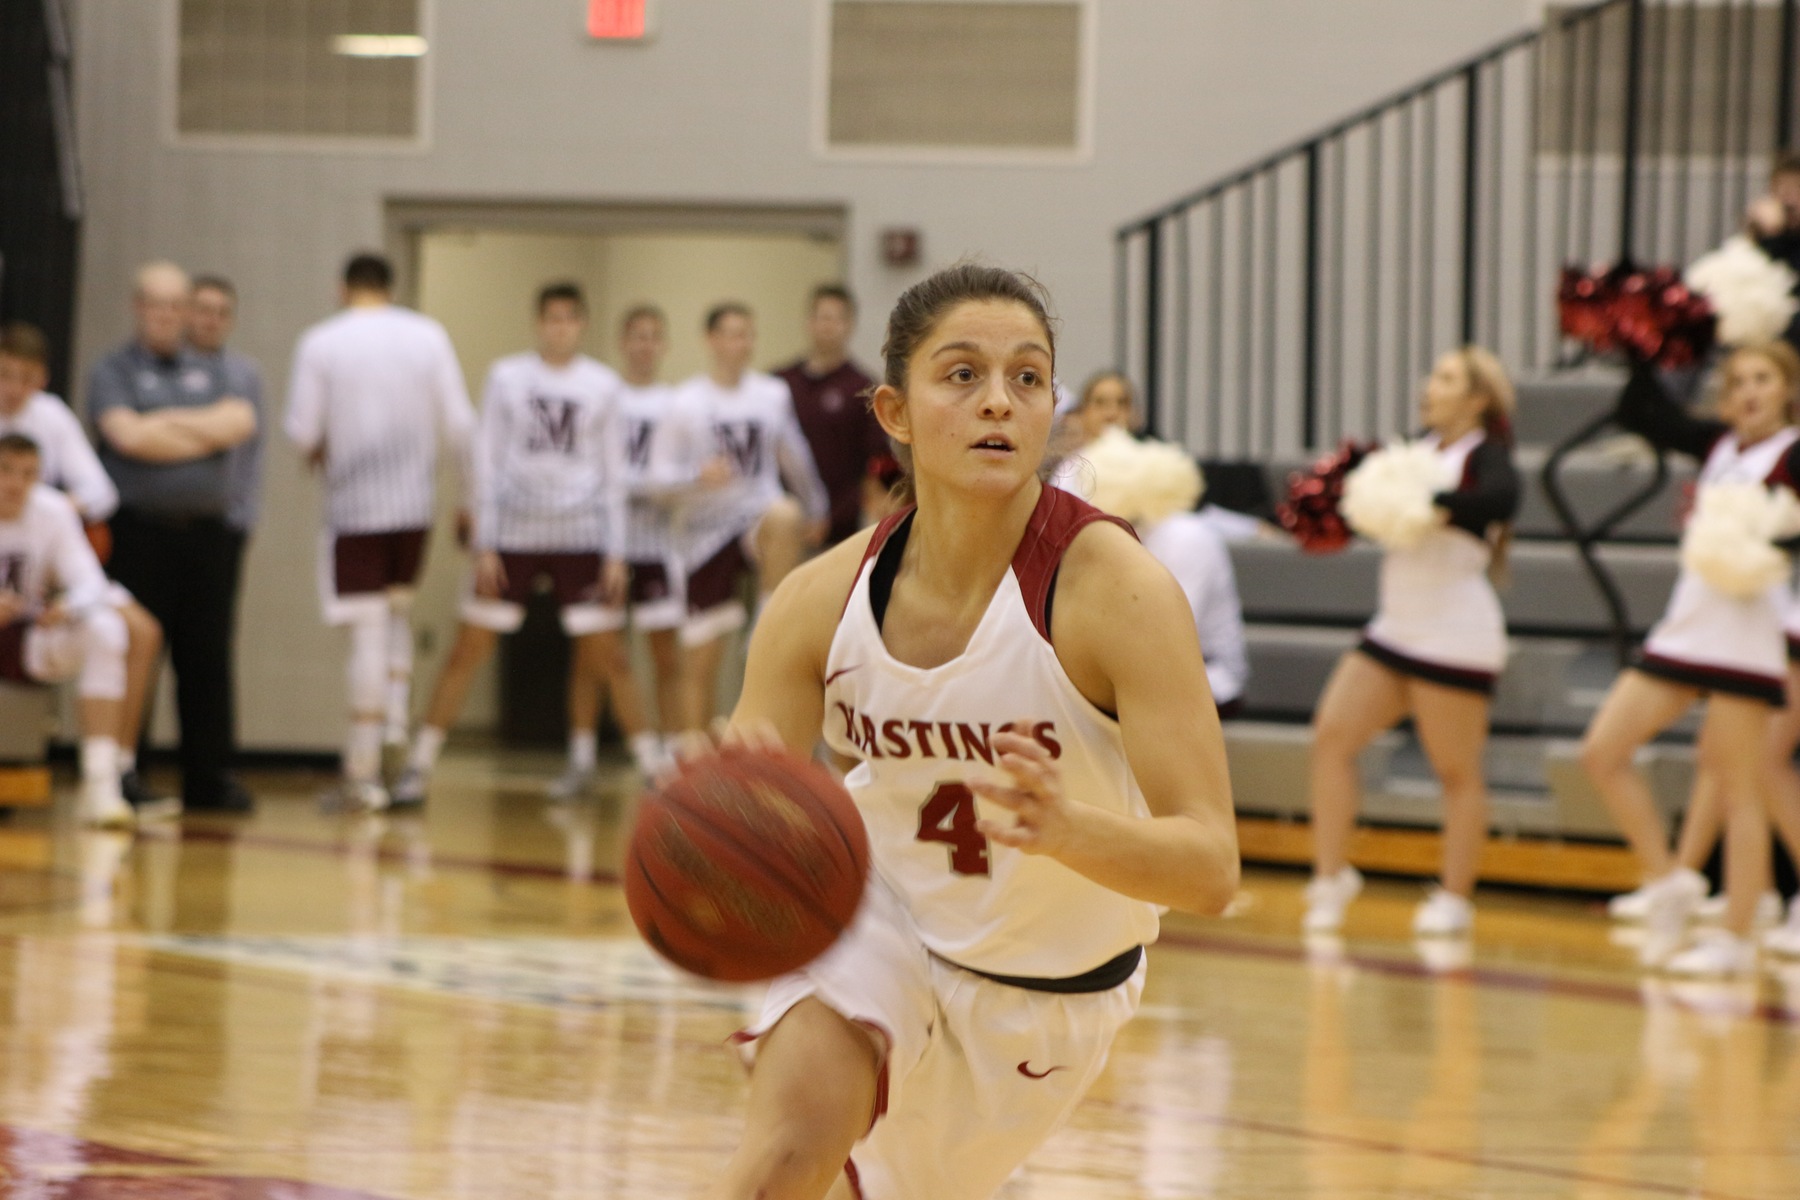 NAIA Division II Women's Basketball National Player of the Week - No. 8